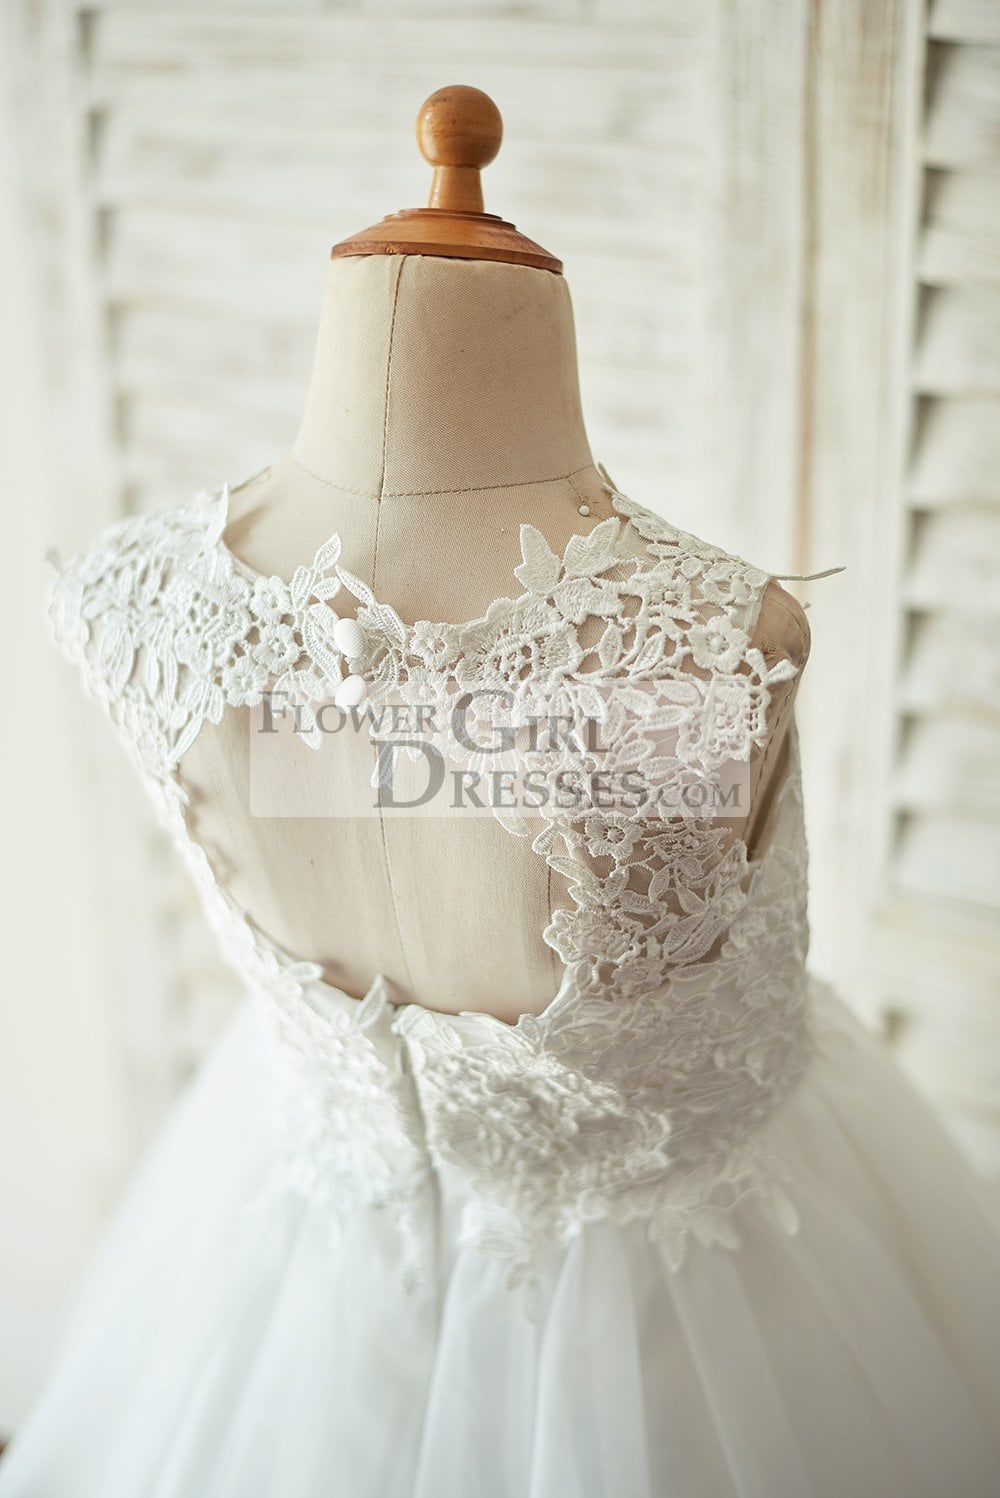 Ivory Lace Champagne Tulle Wedding Flower Girl Dress with Keyhole Back